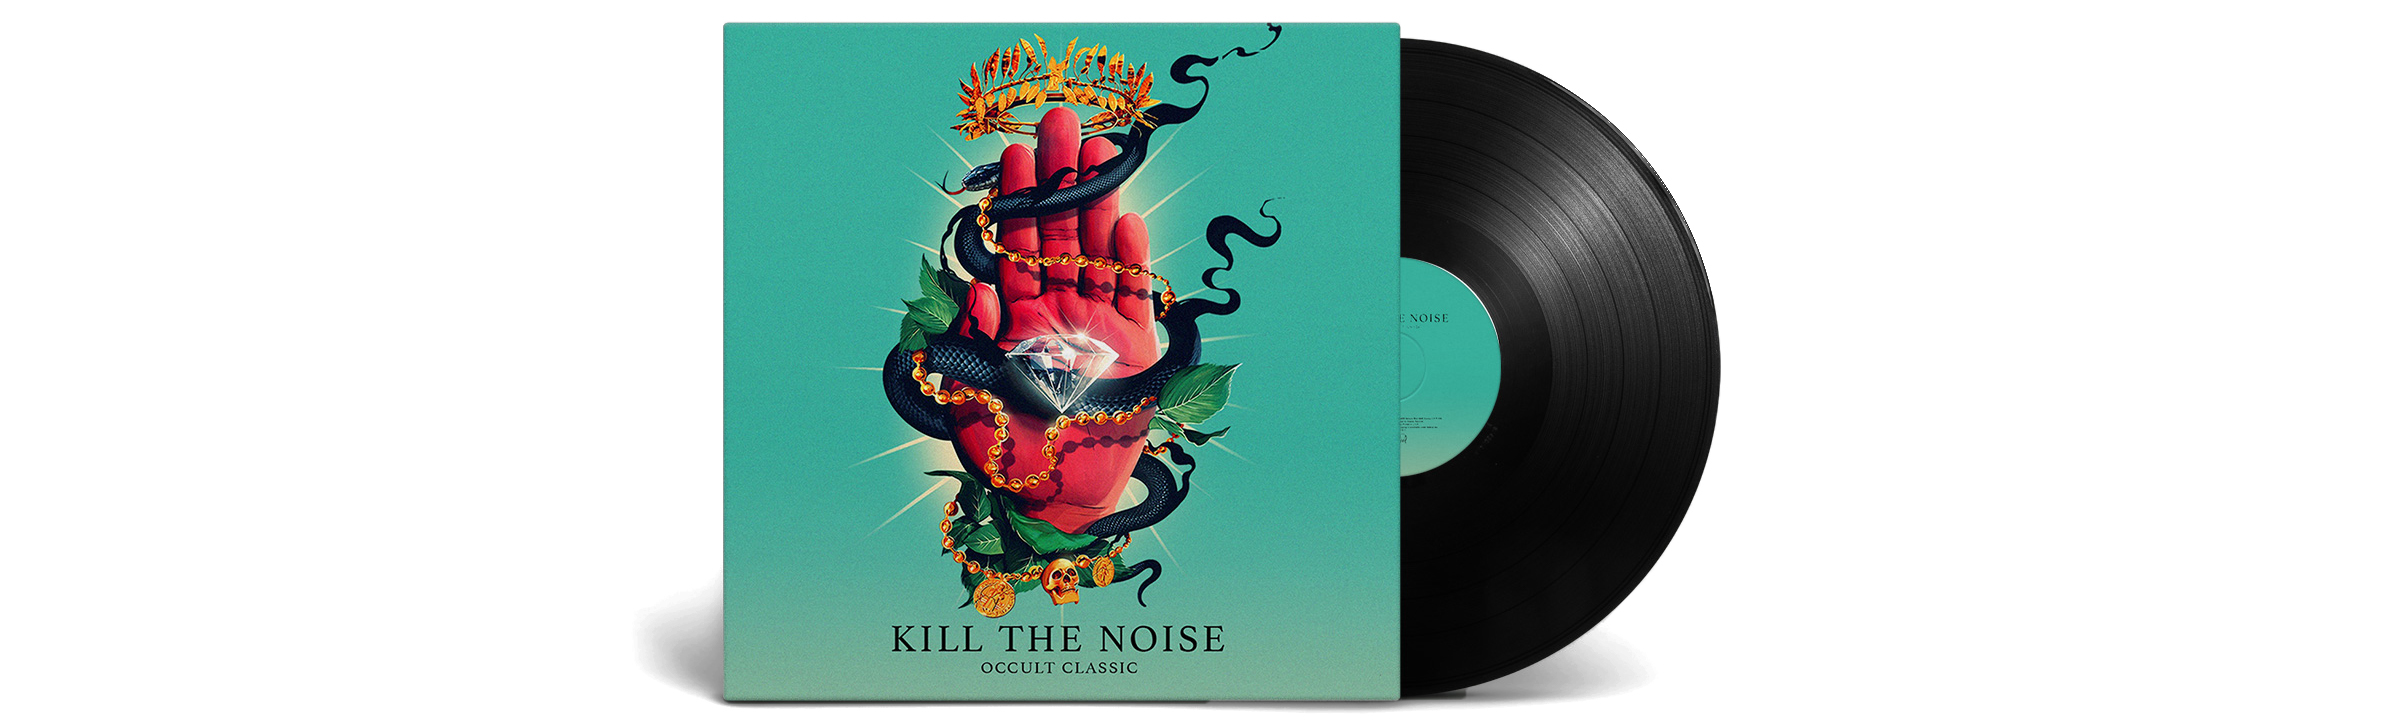 Feel the noise. Kill the Noise. Kill the Noise шрифт. The Noise мягкая игрушка. Thumbs up Kill the Noise.